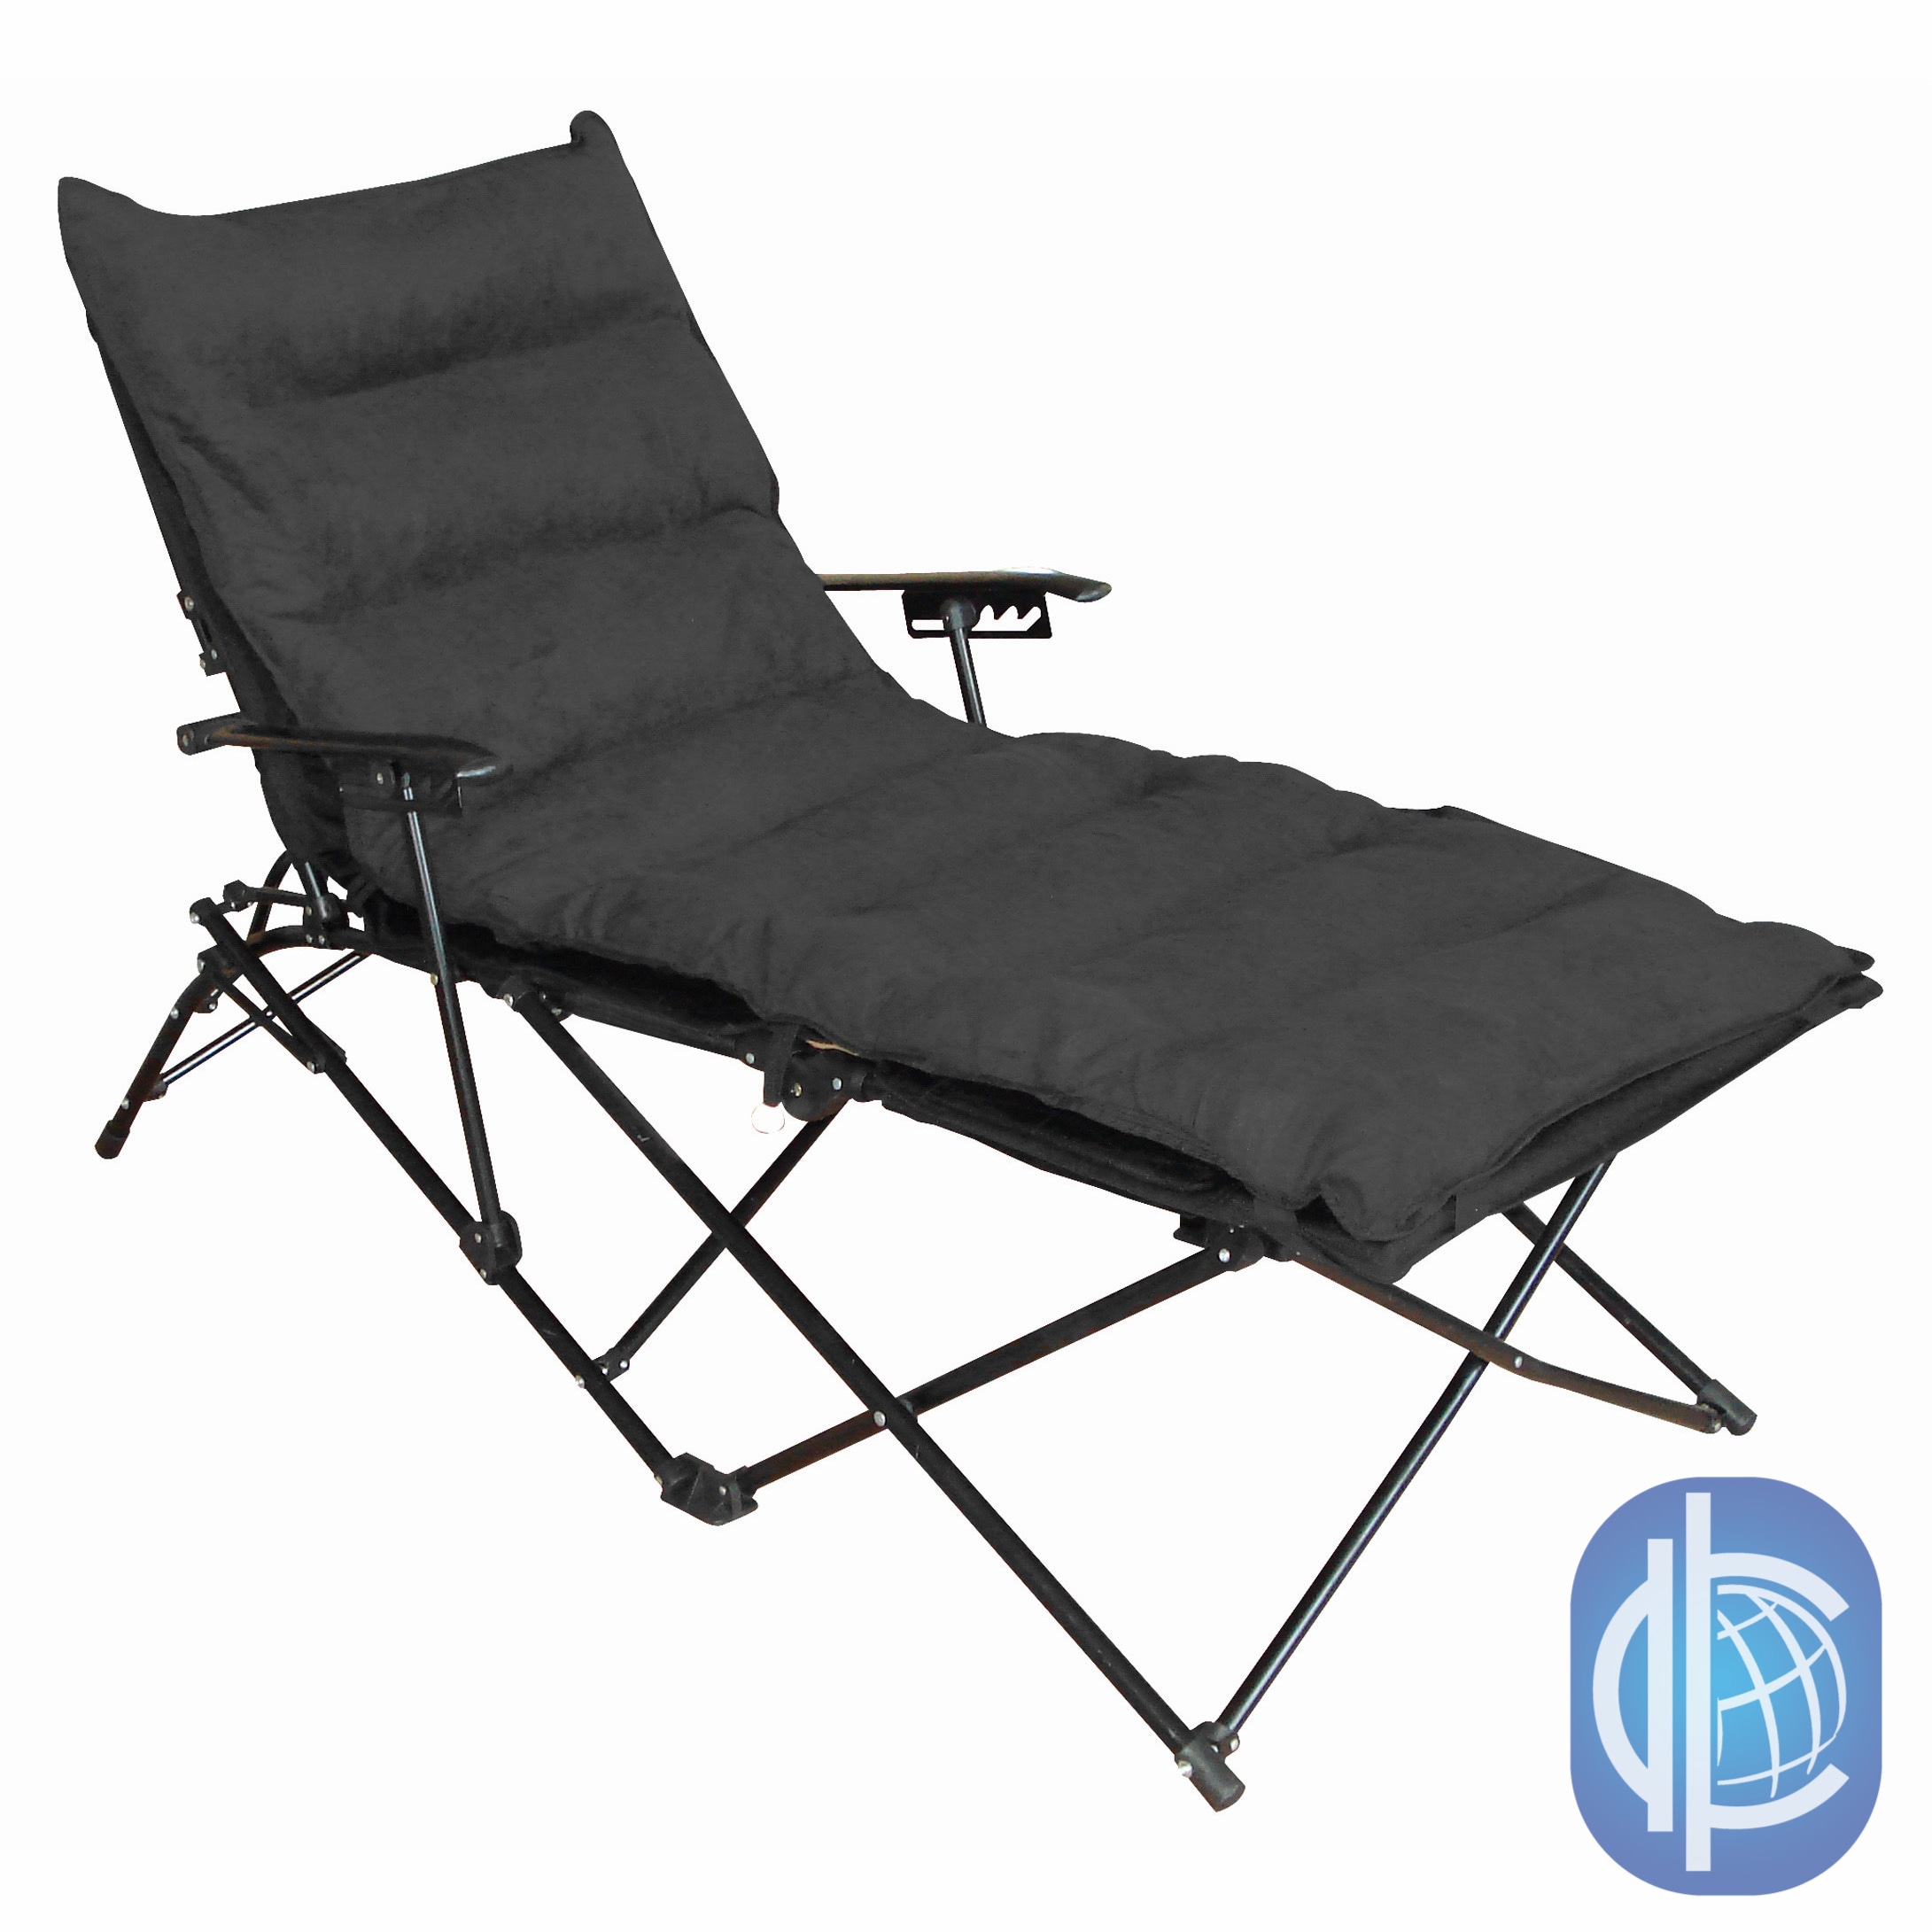 International Caravan Indoor/ Outdoor Folding Chaise Lounge Chair With Microsuede Seat Cover (Saddle Brown, Black, Cardinal Red, SageUpholstery fill Polyester FillDetachable Microsuede Cover allows for comfortable use in both indoor and outdoor settingsF